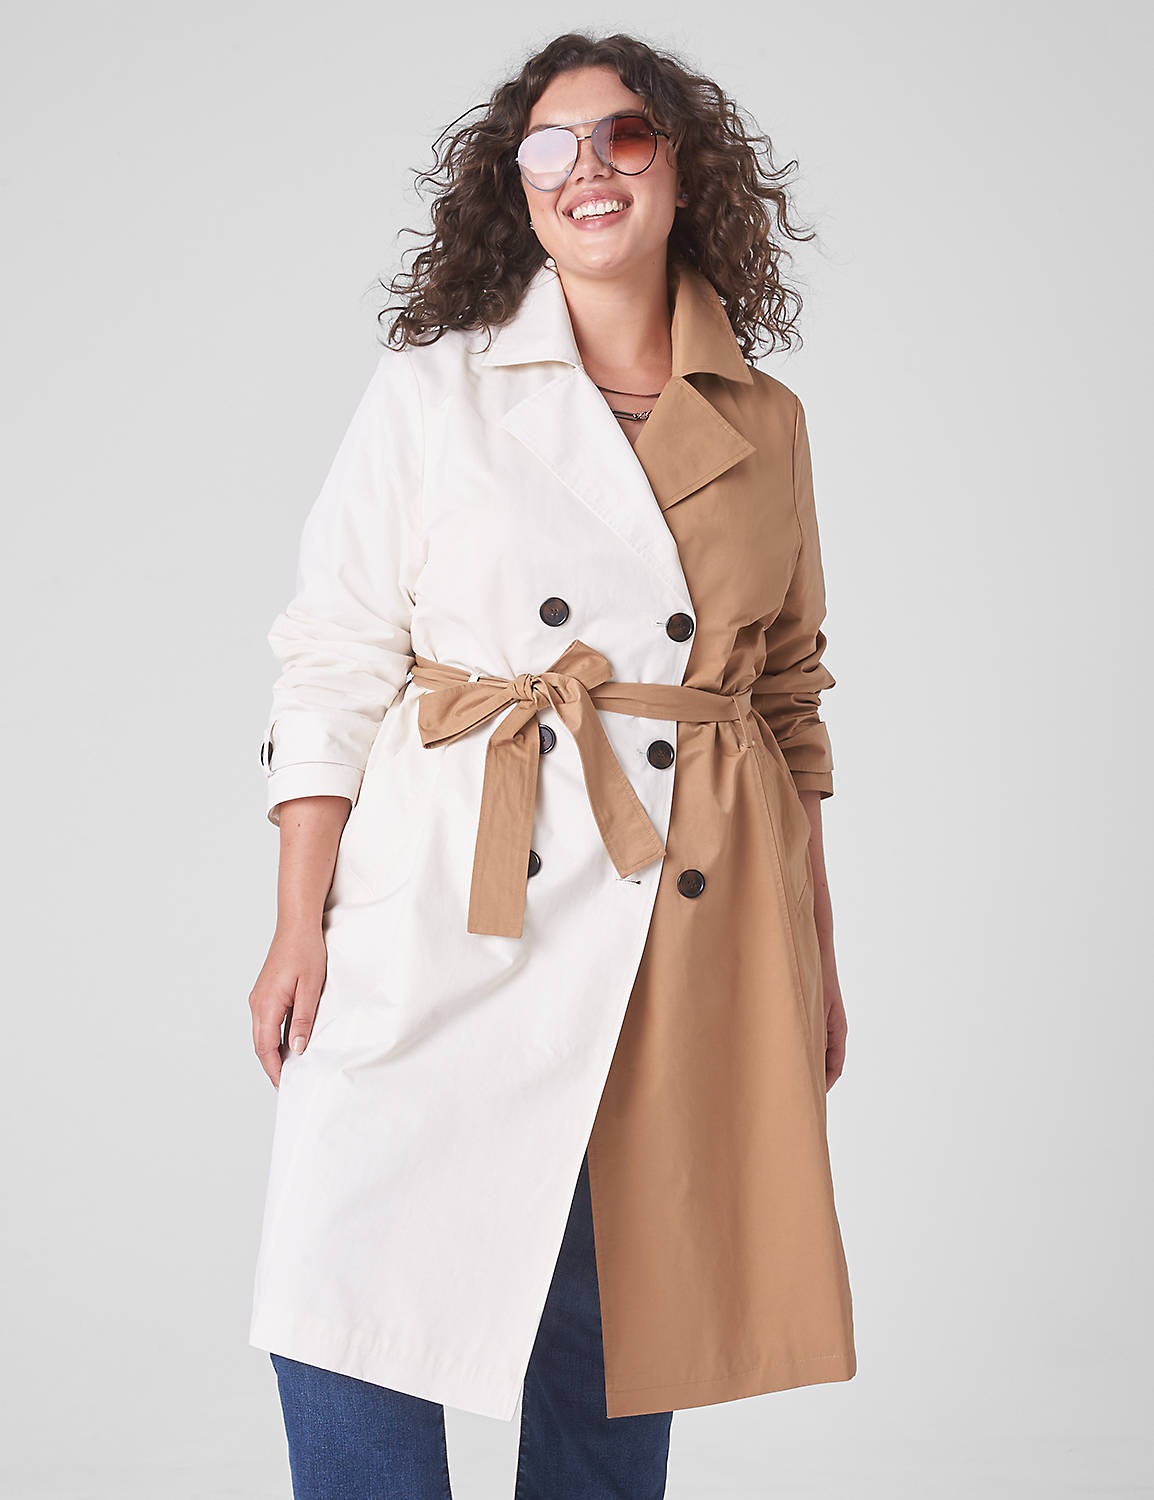 Colorblock Trench Coat 1129302 Product Image 3